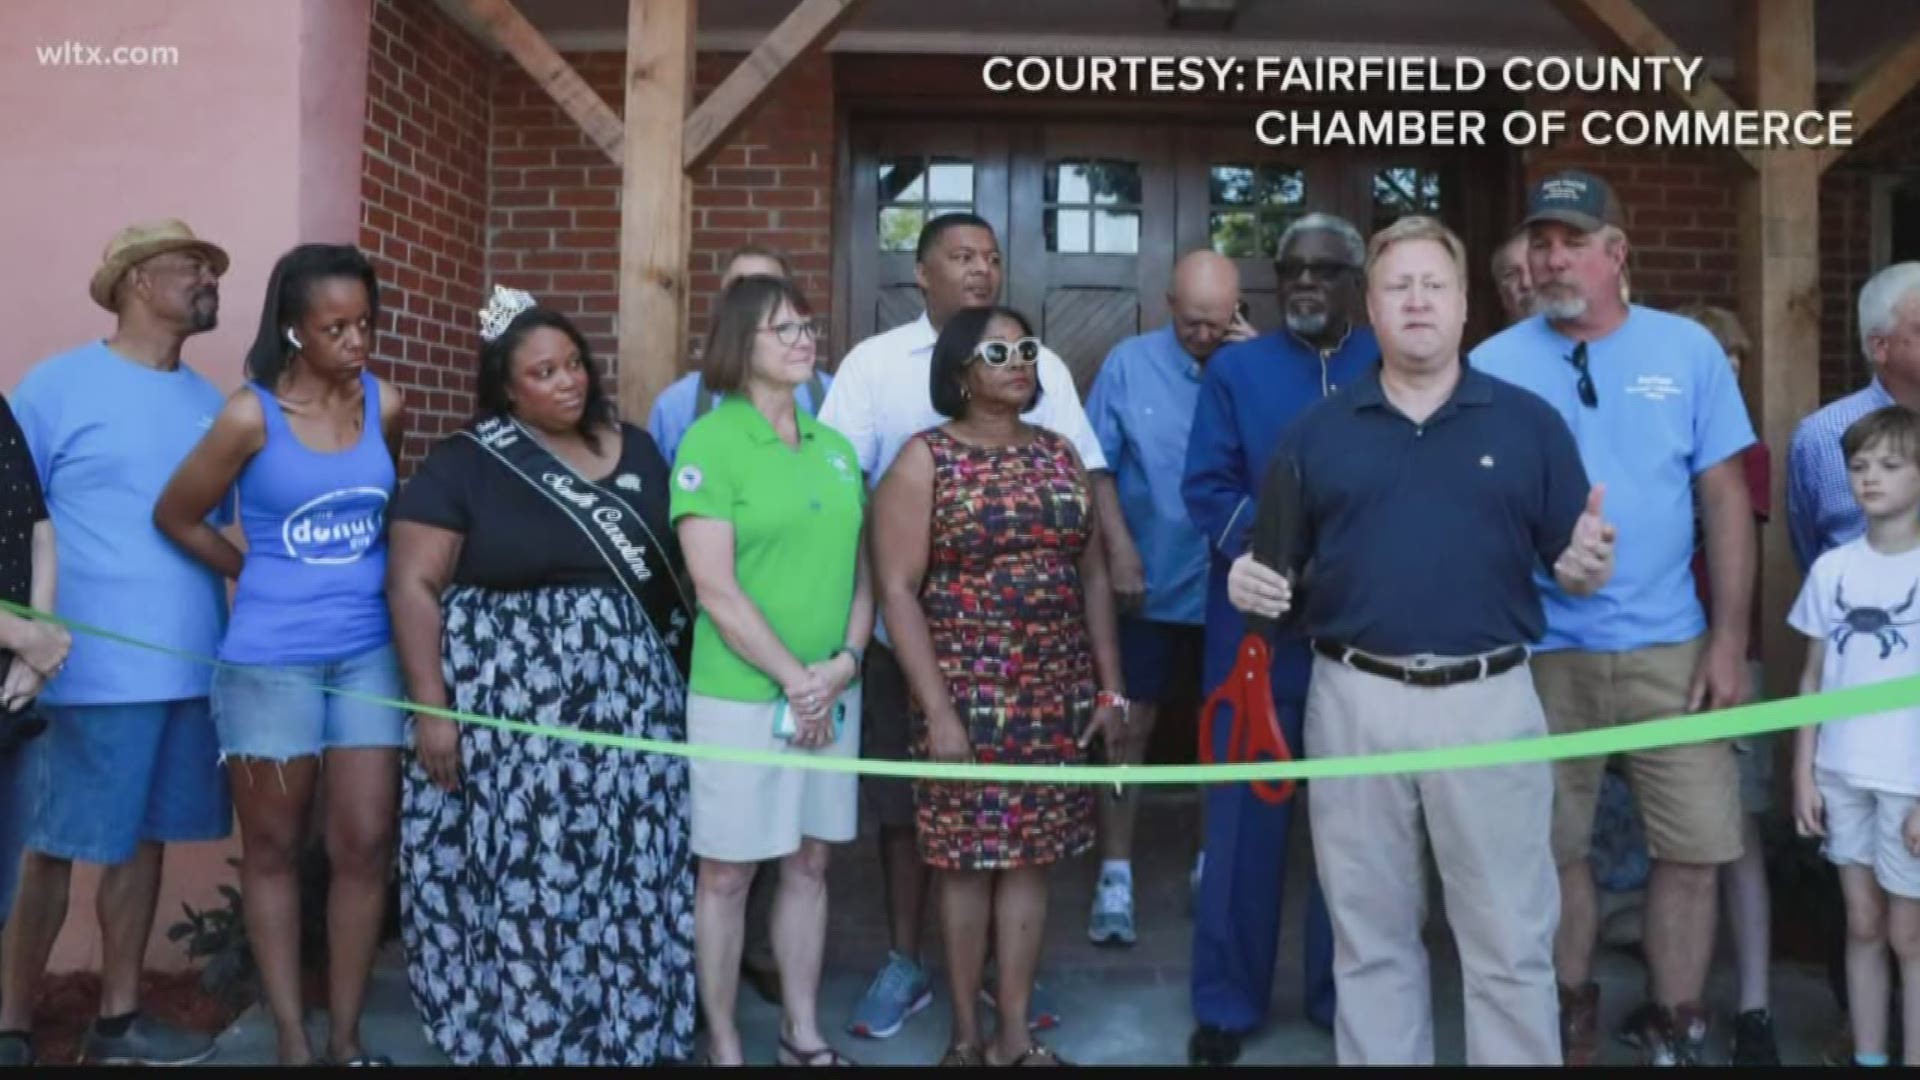 The Fairfield Farmers and Artisans Market celebrated its grand opening on May 18.